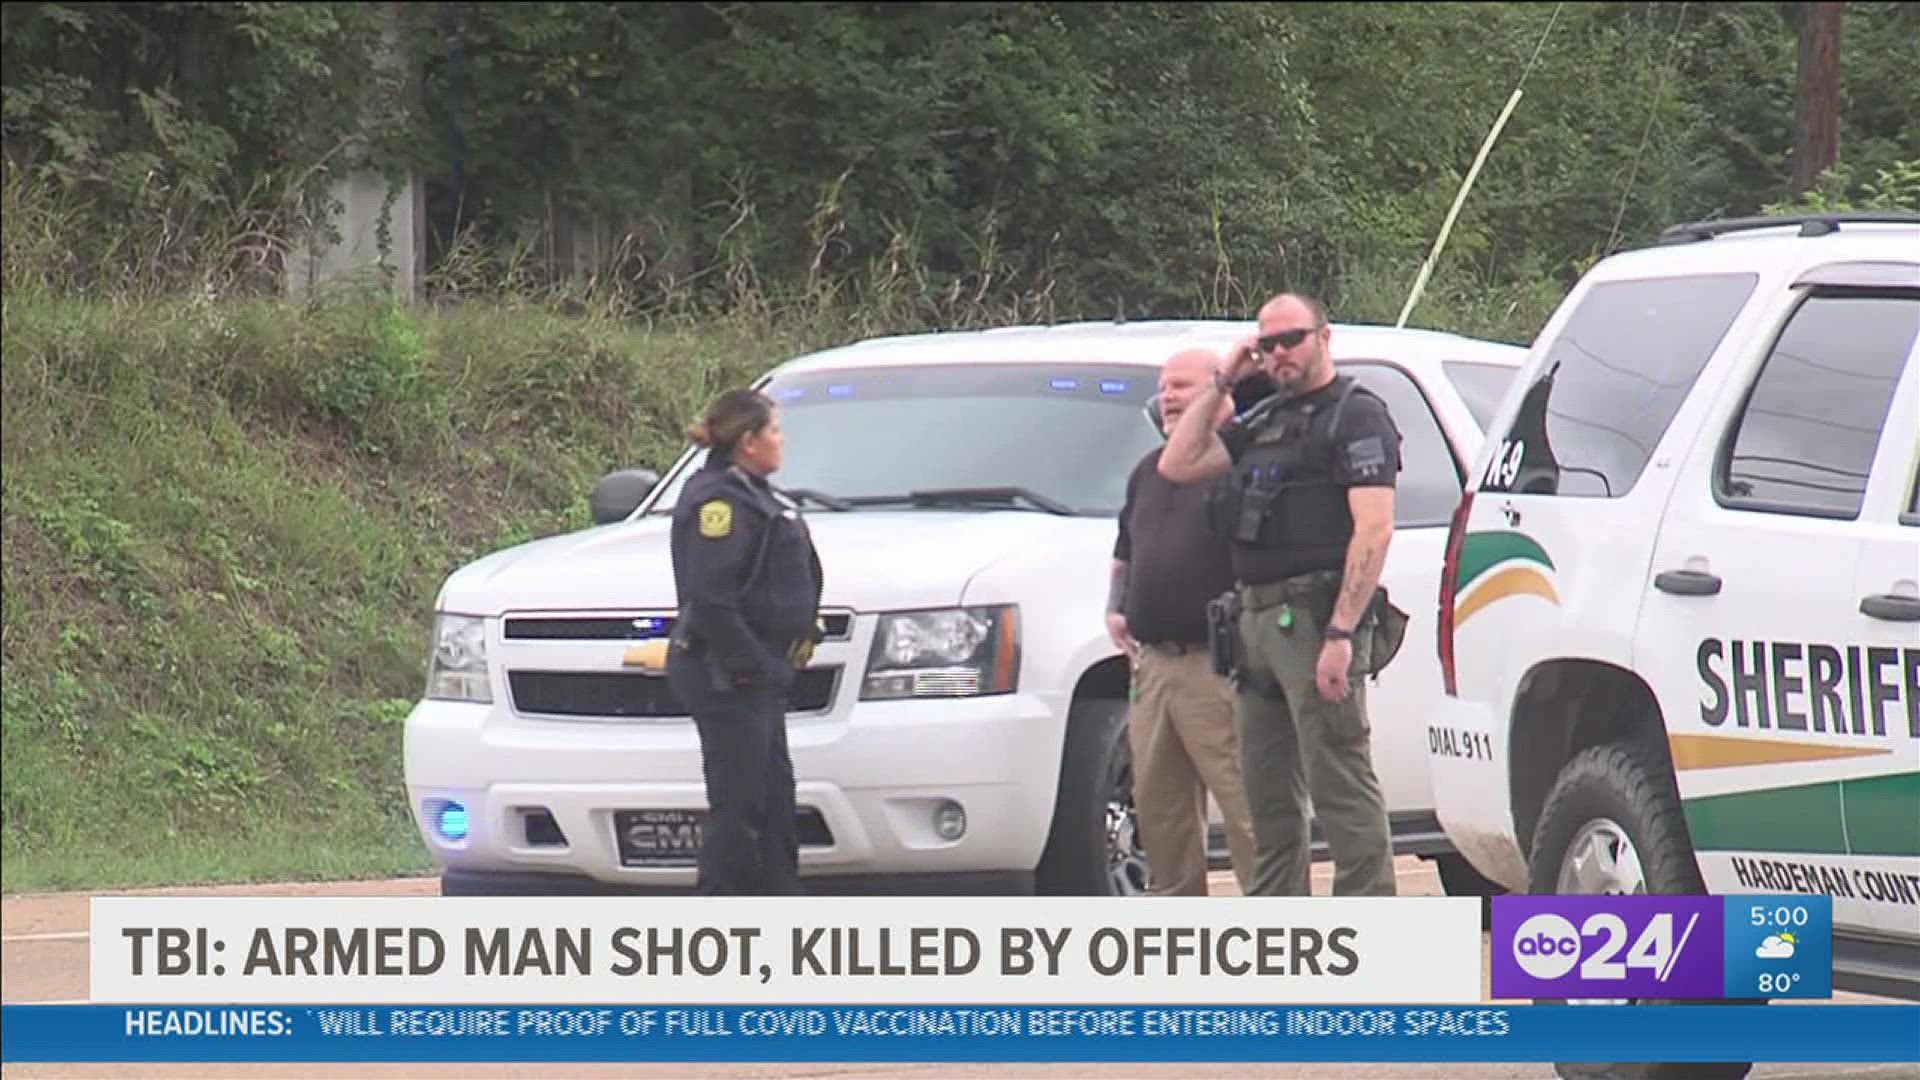 It's first the deadly officer-involved shooting in the department's more than 60-year history.